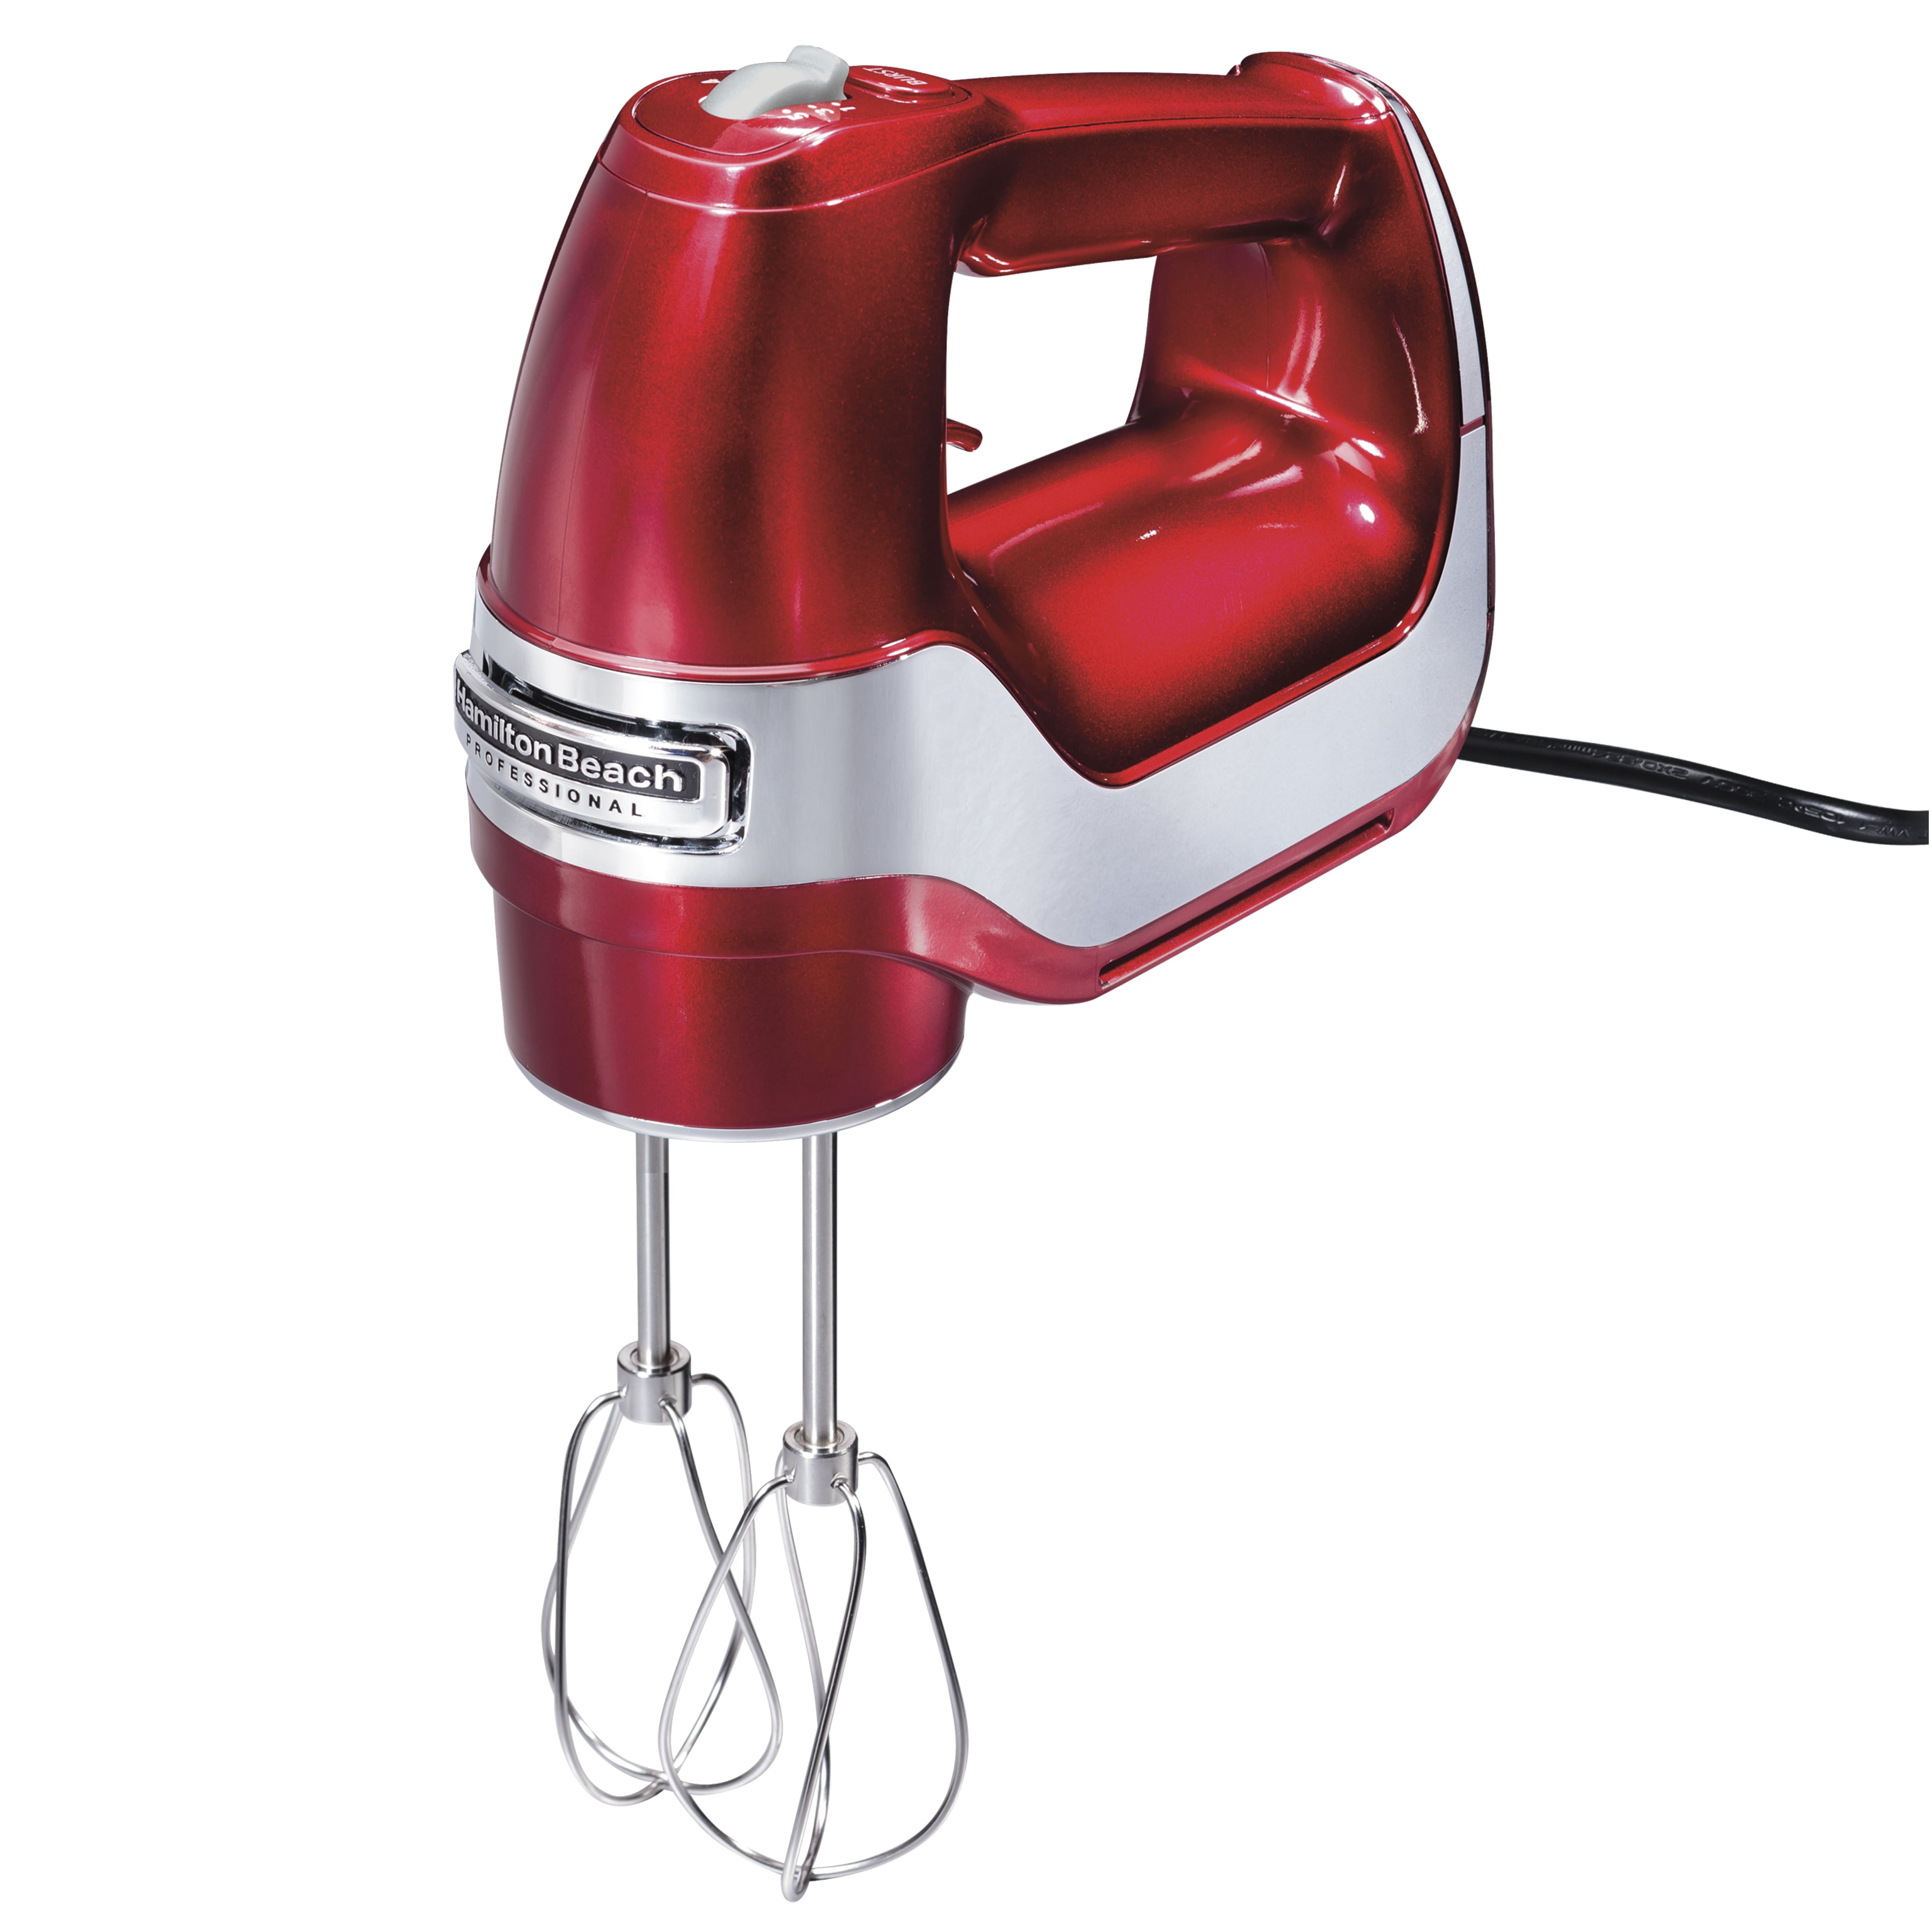 Details about   5 Speed Hand Mixer Electric 250W Ultra Power Kitchen Hand Mixer 